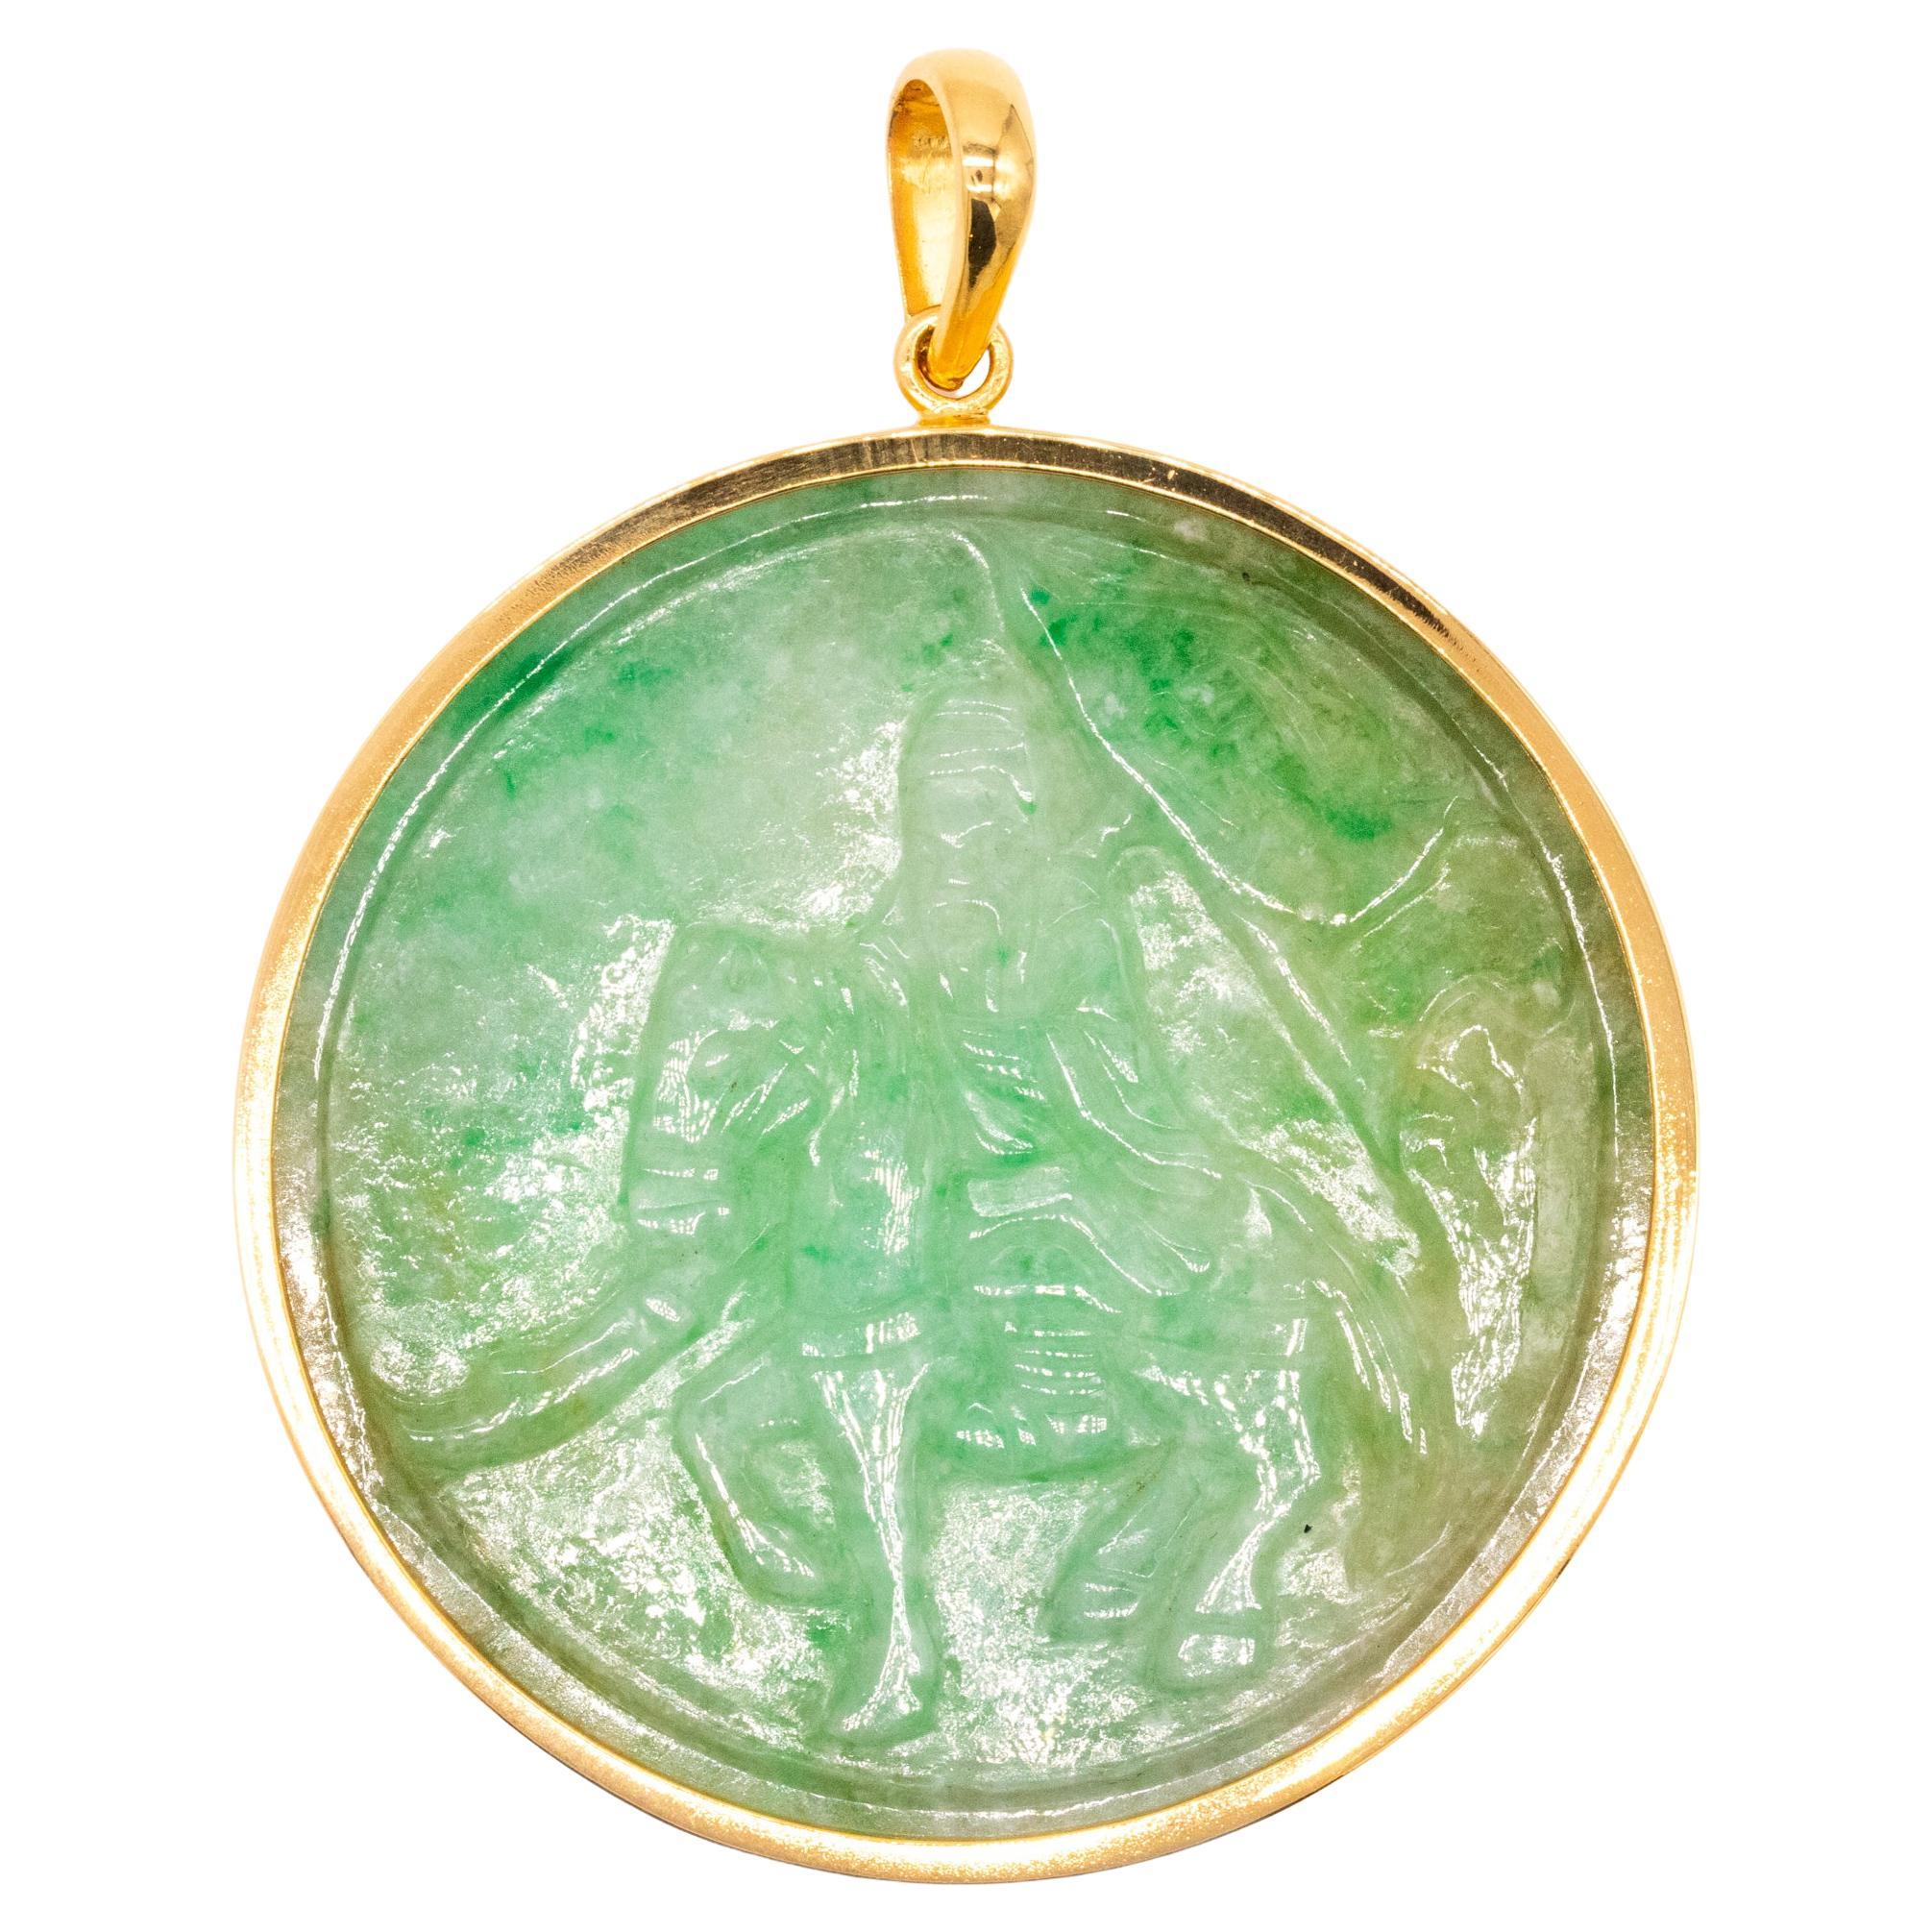 GIA Certified Jadeite Green Jade Pendant in 18Kt Yellow Gold 102.27 Cts Gemstone For Sale